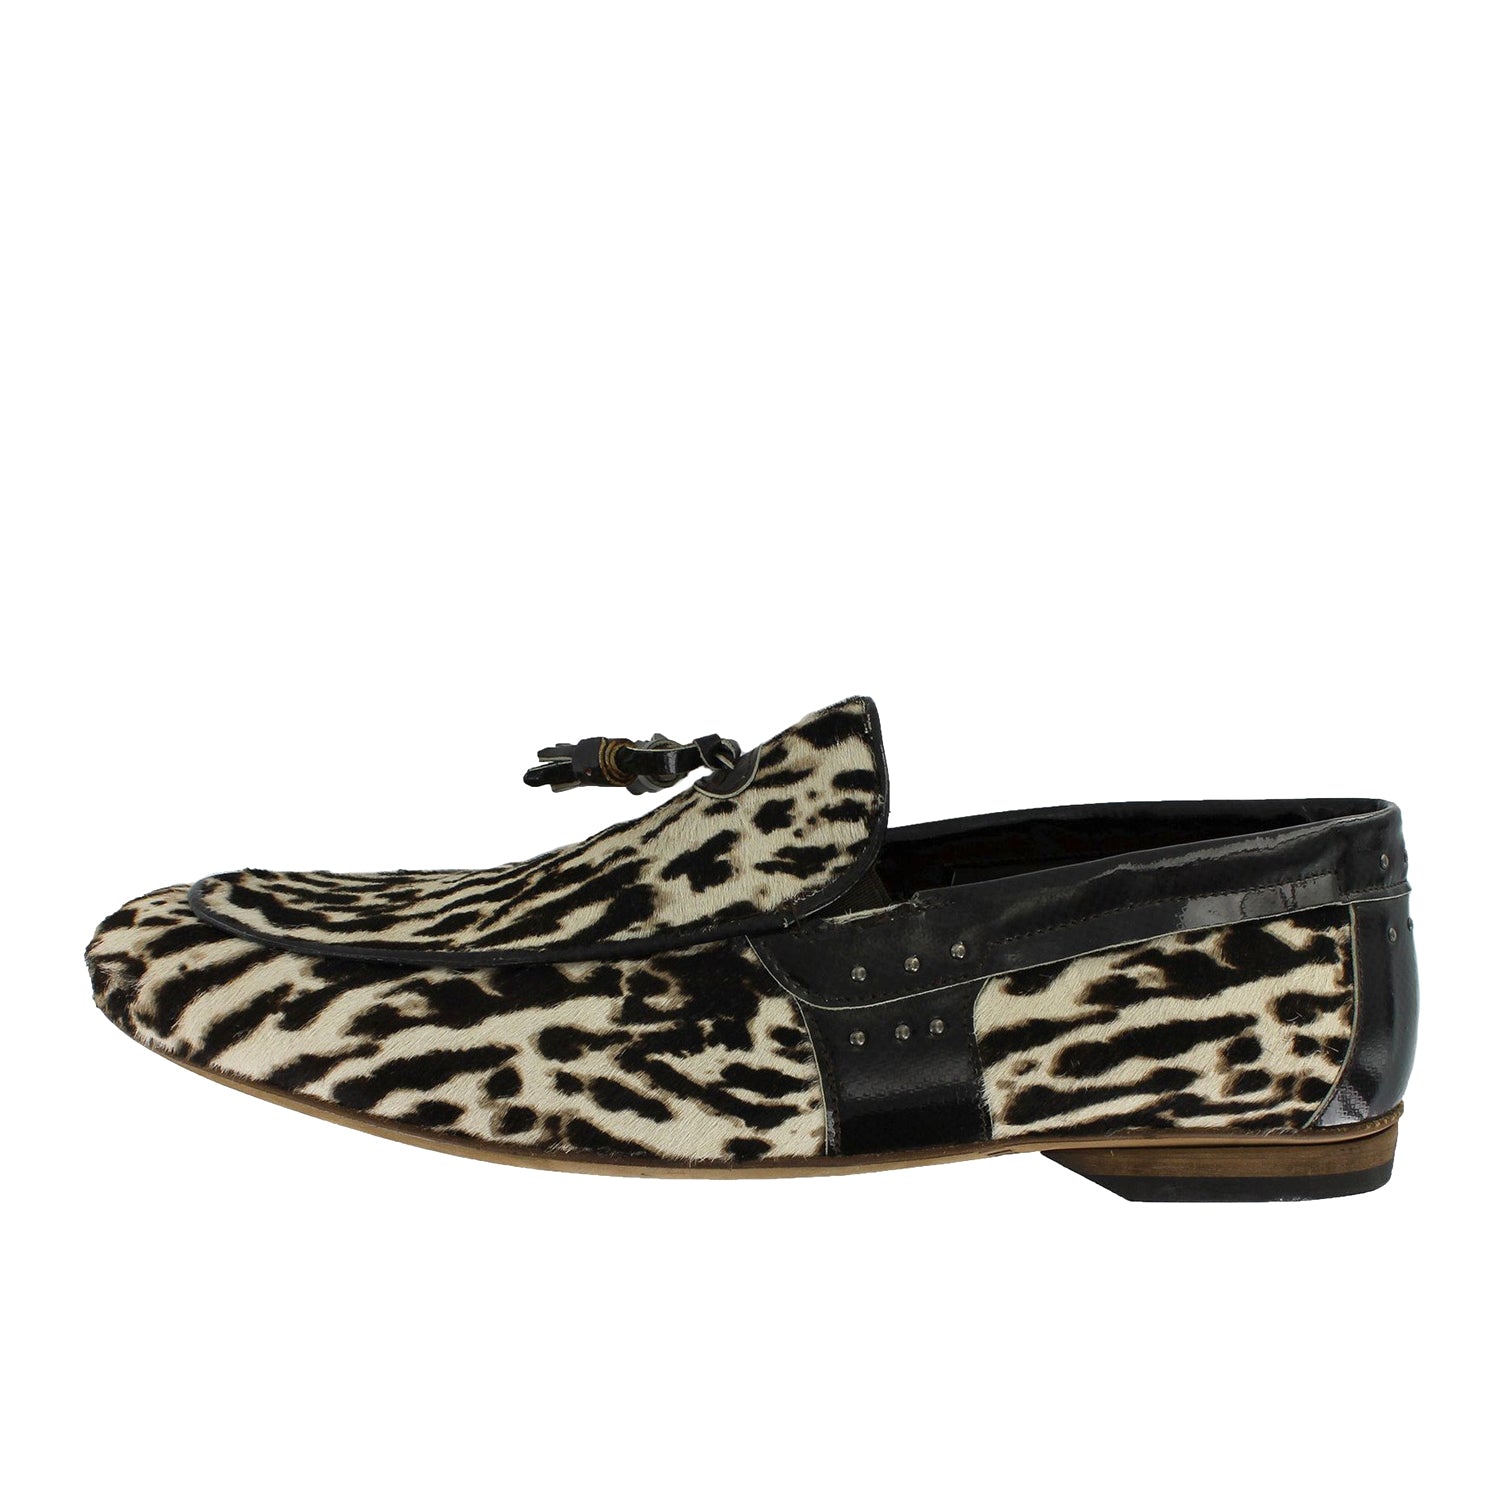 8001 - The Leopard